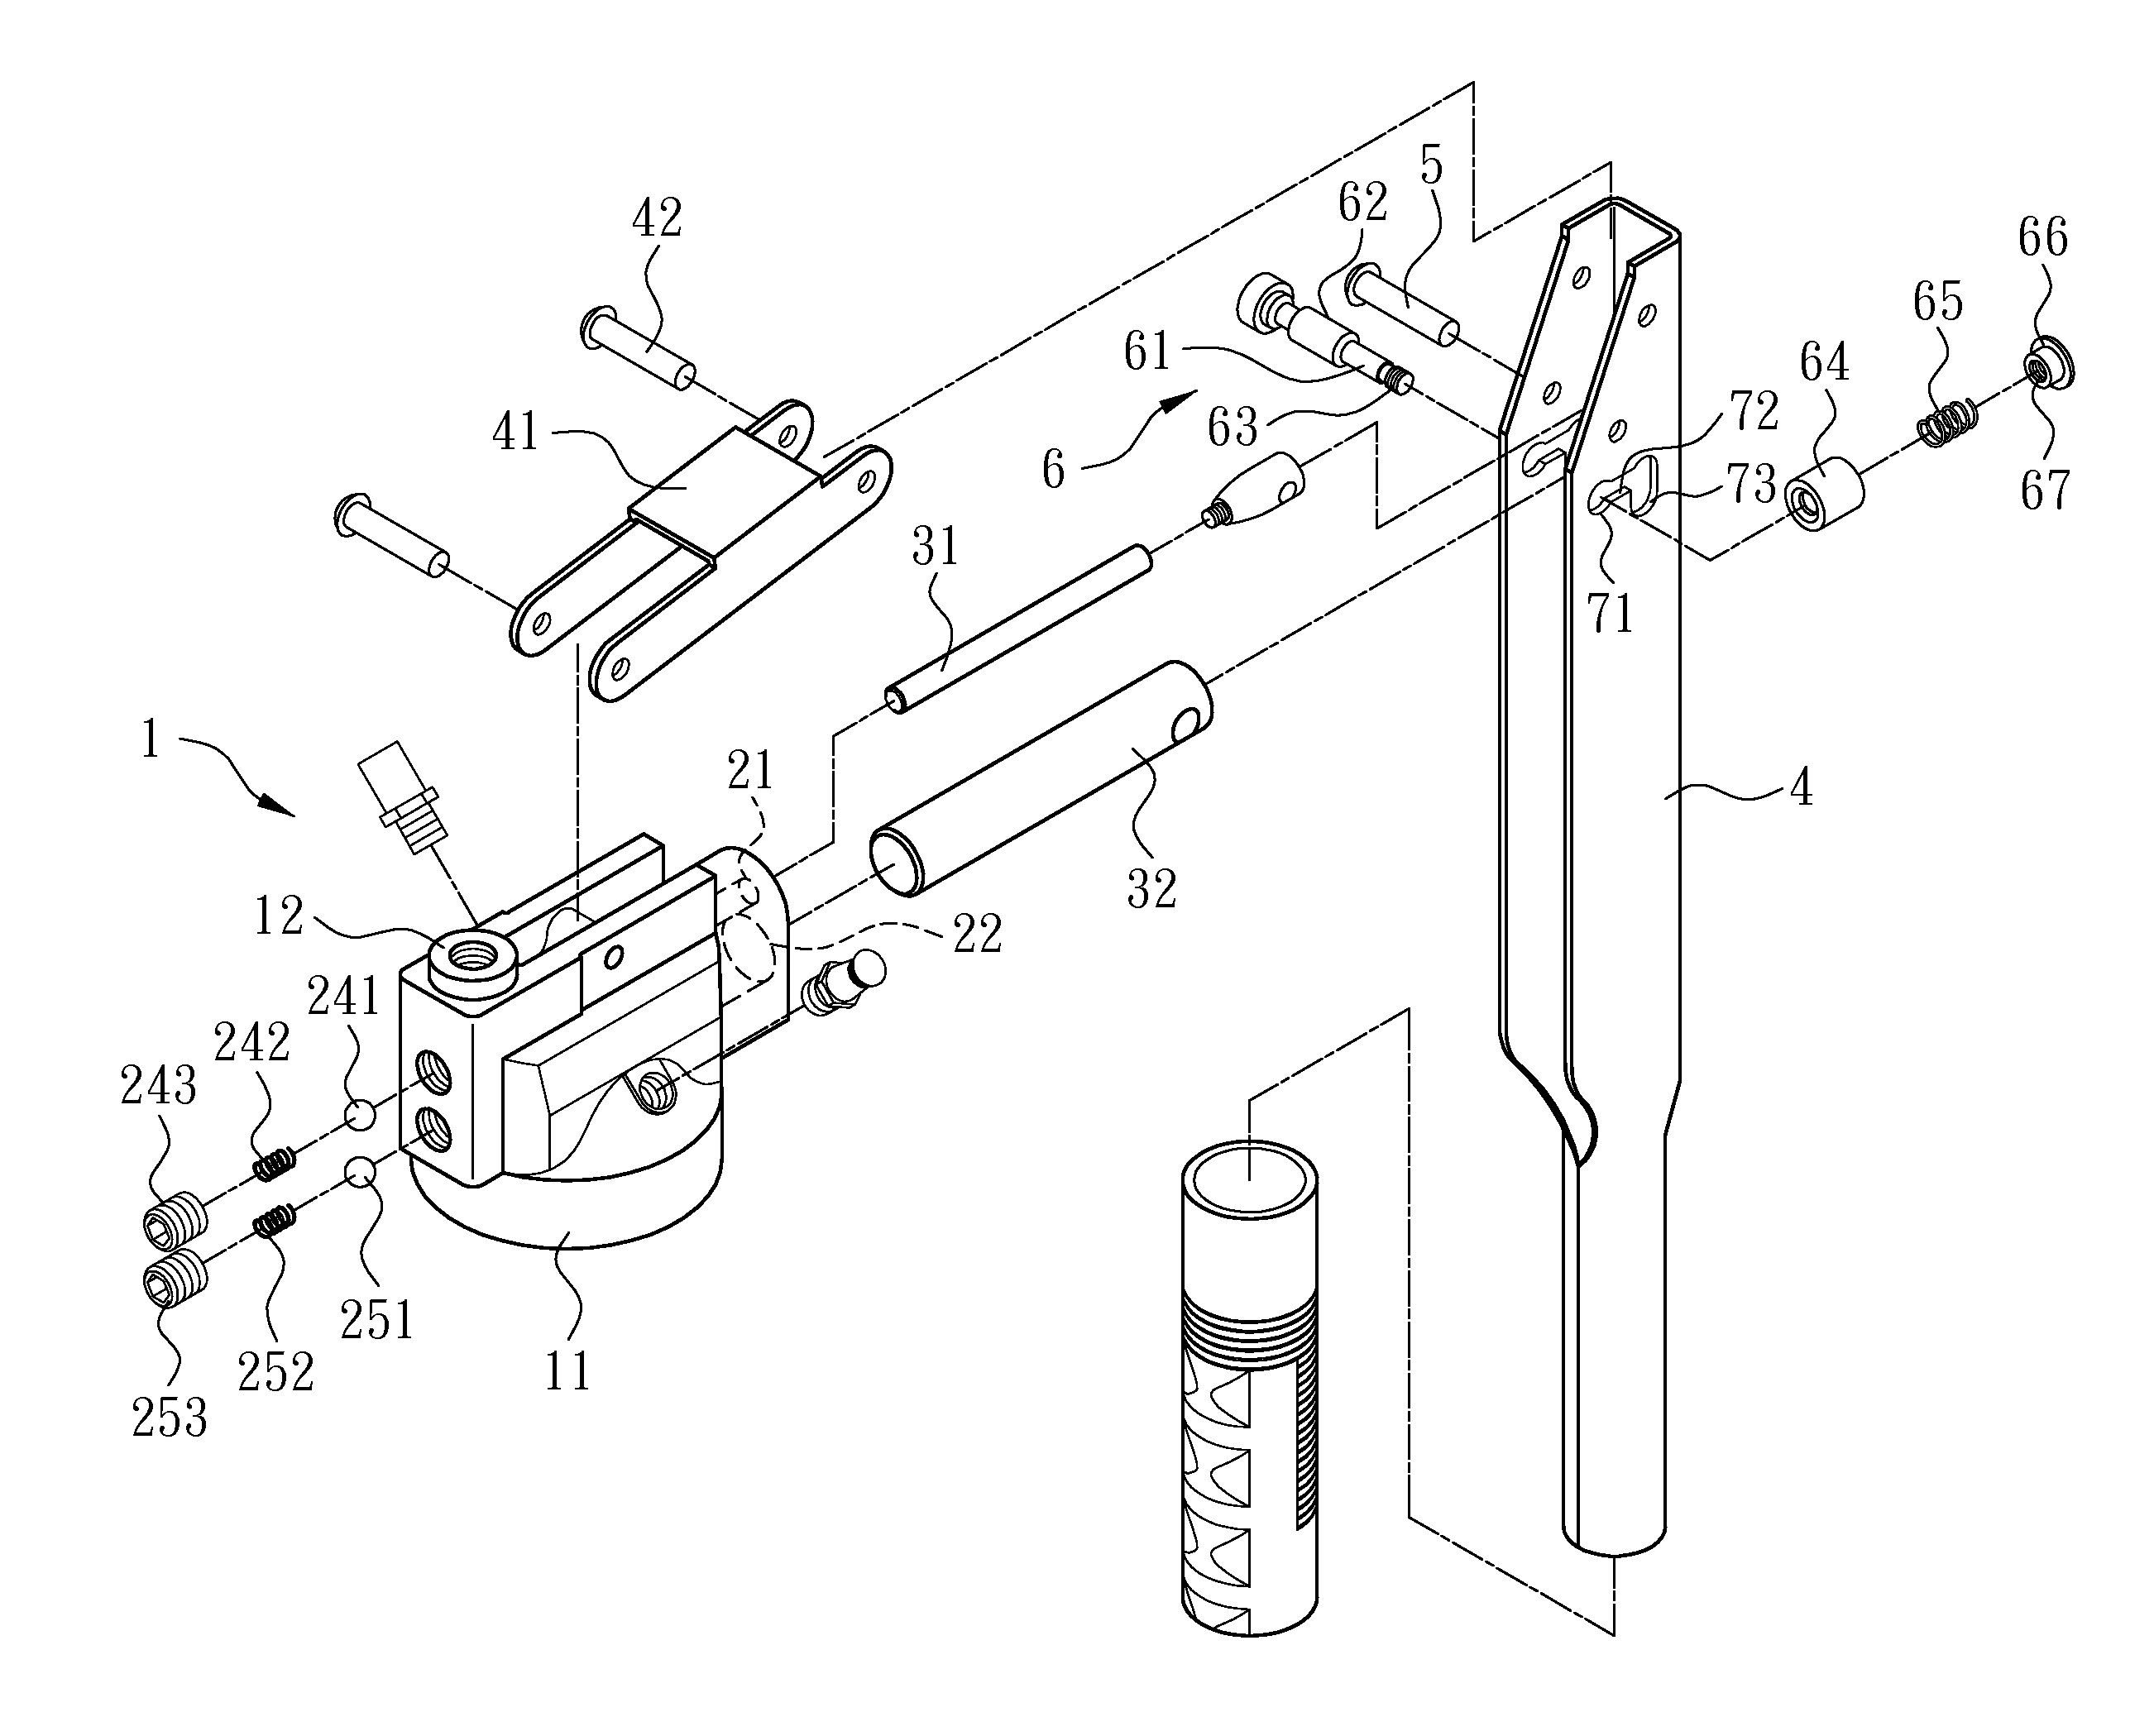 Oil Flow Control Structure for Grease Gun